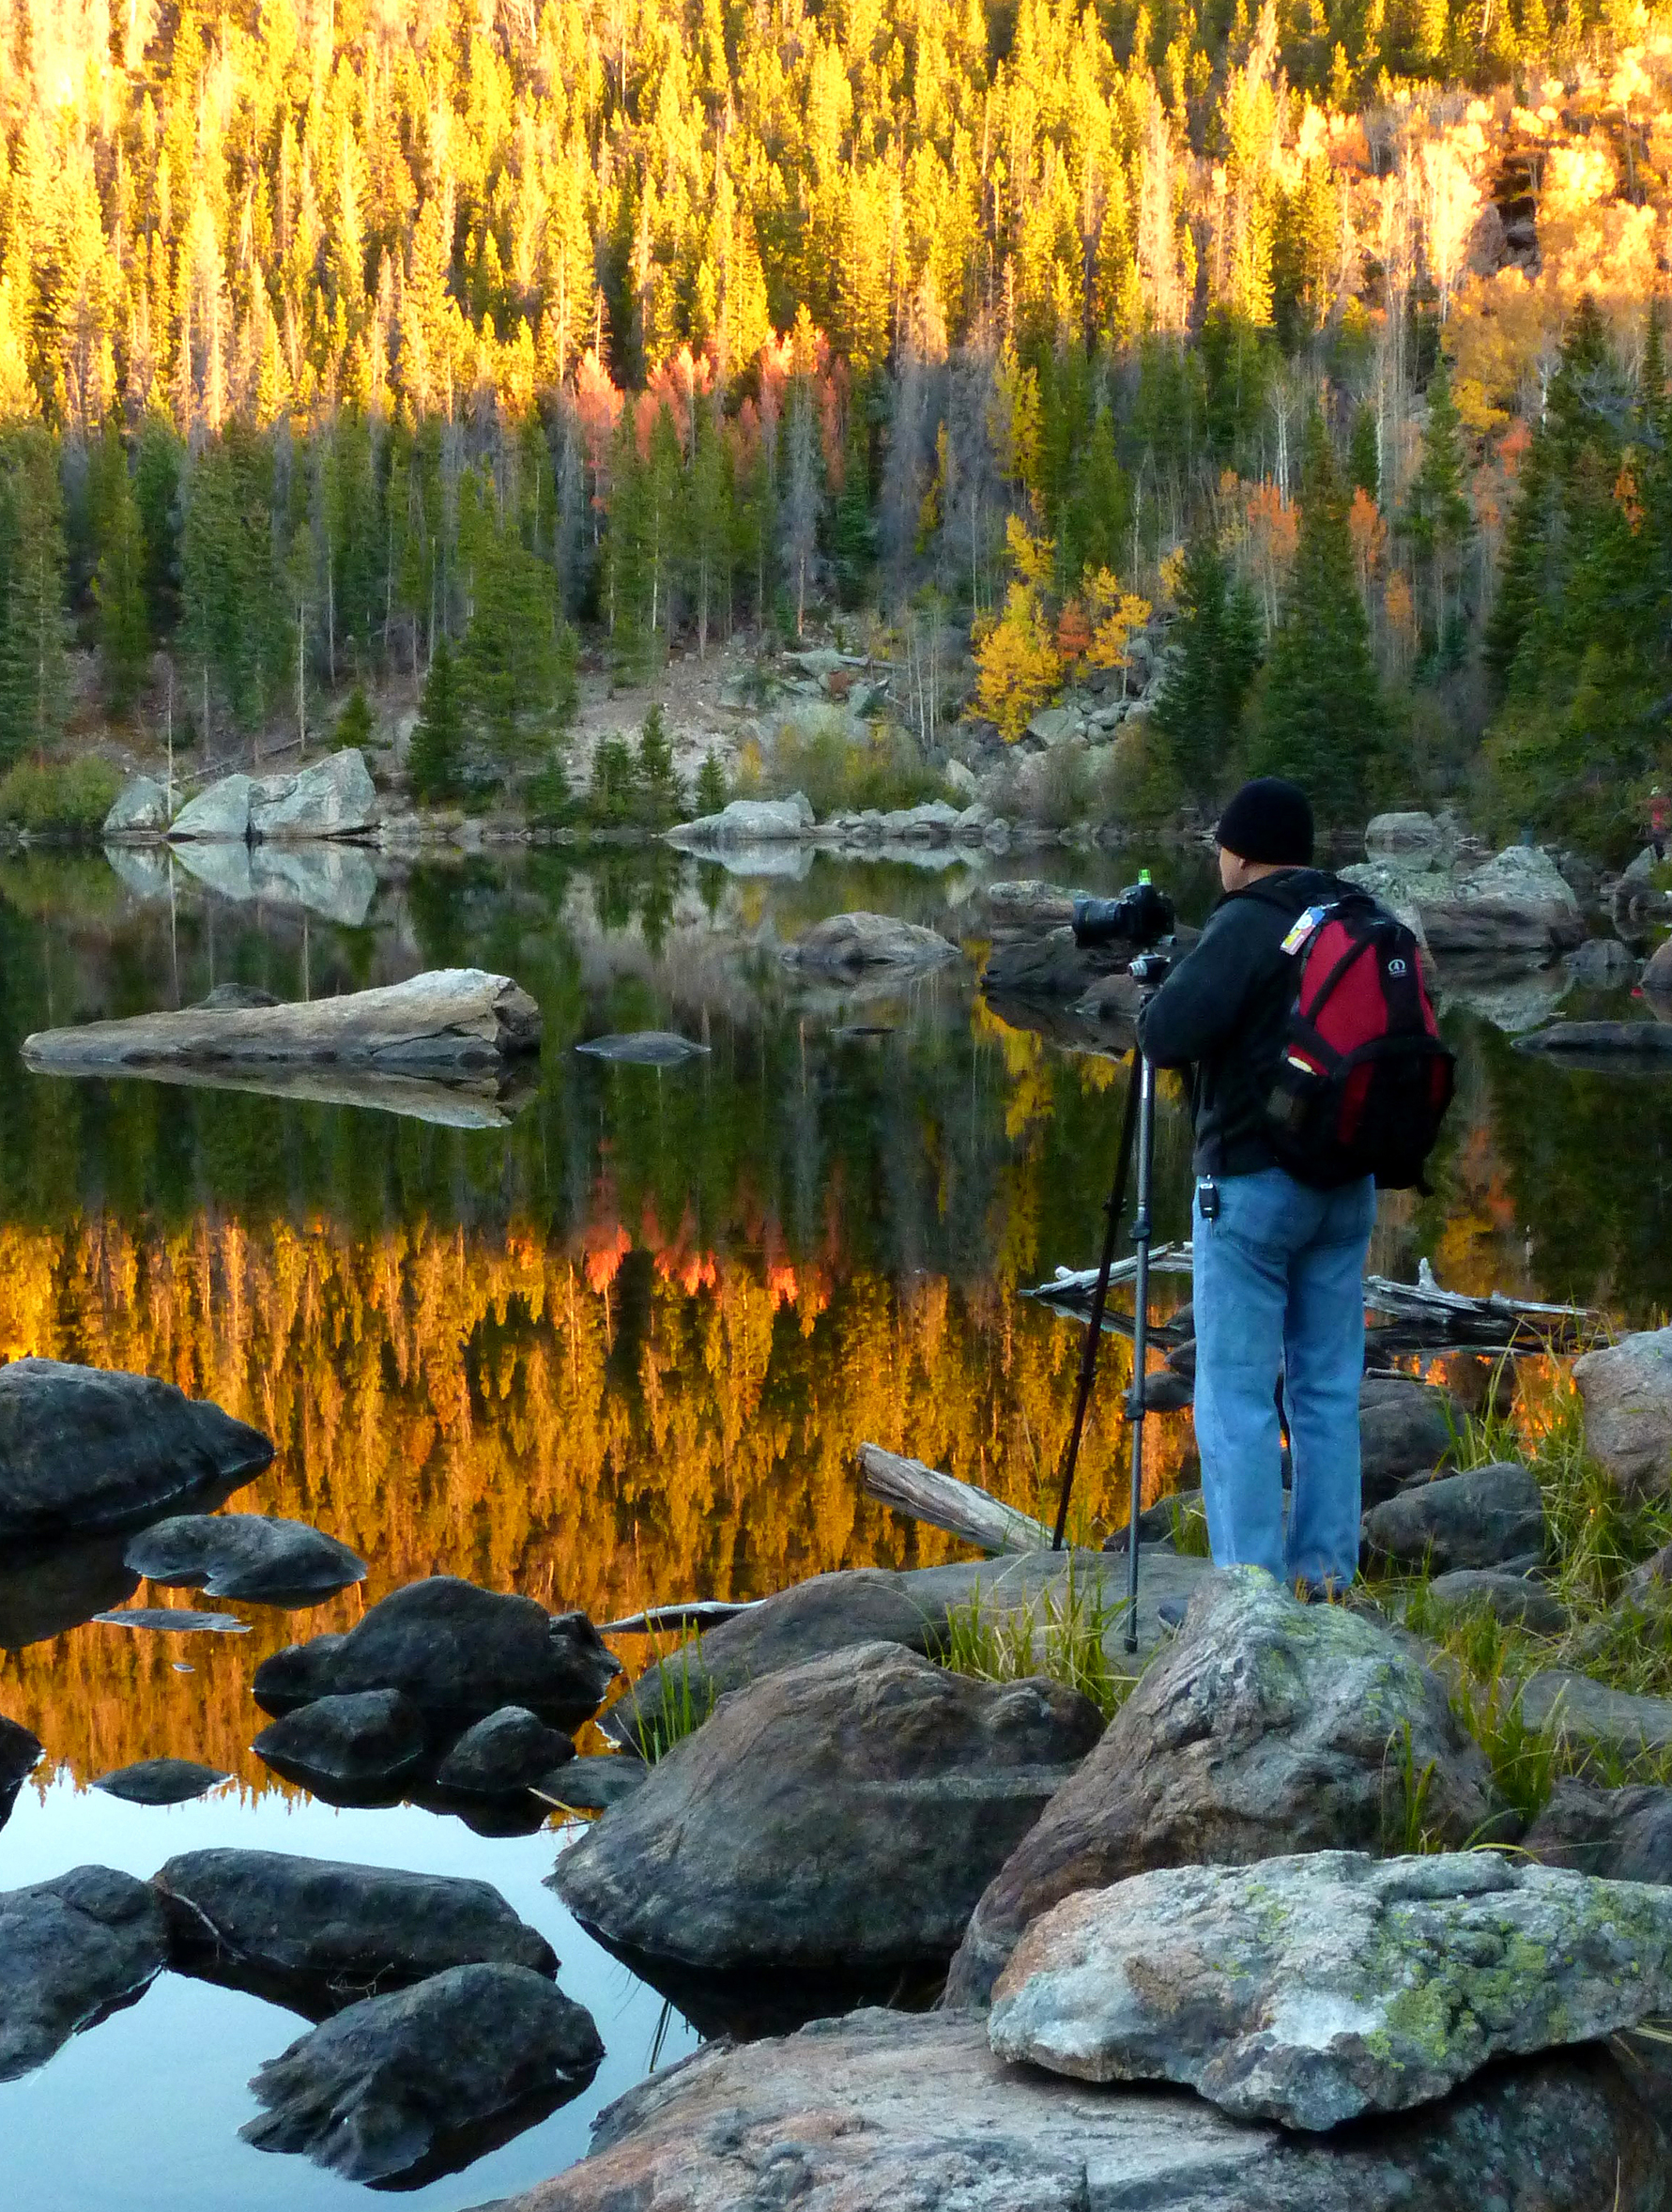 Norman at Bear Lake at Sunrise  -  Rocky Mountain National Park, Colorado.  Photograph by Jean Nokleby.